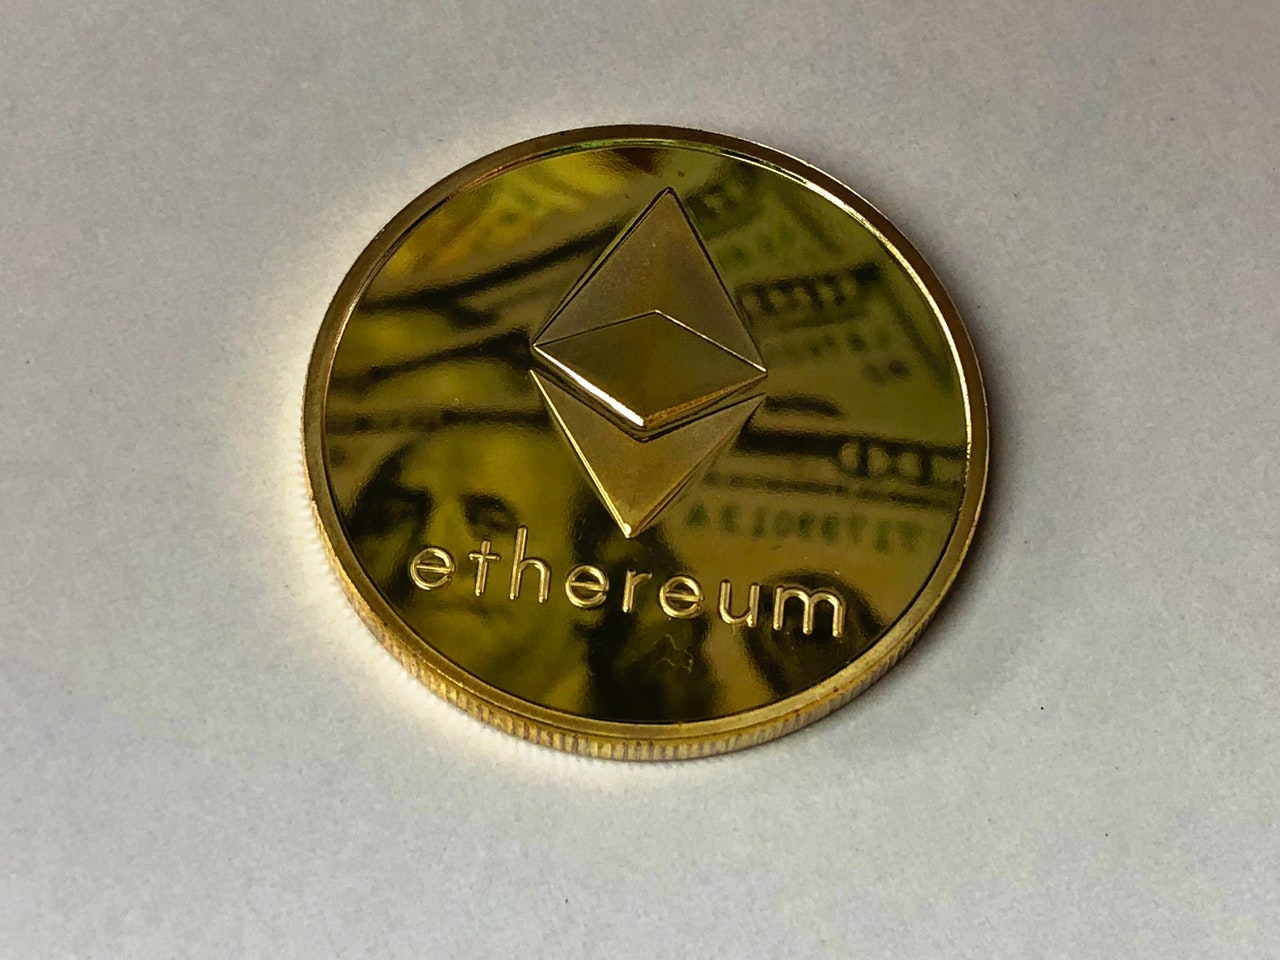 An Image showing the process of investing in Ethereum